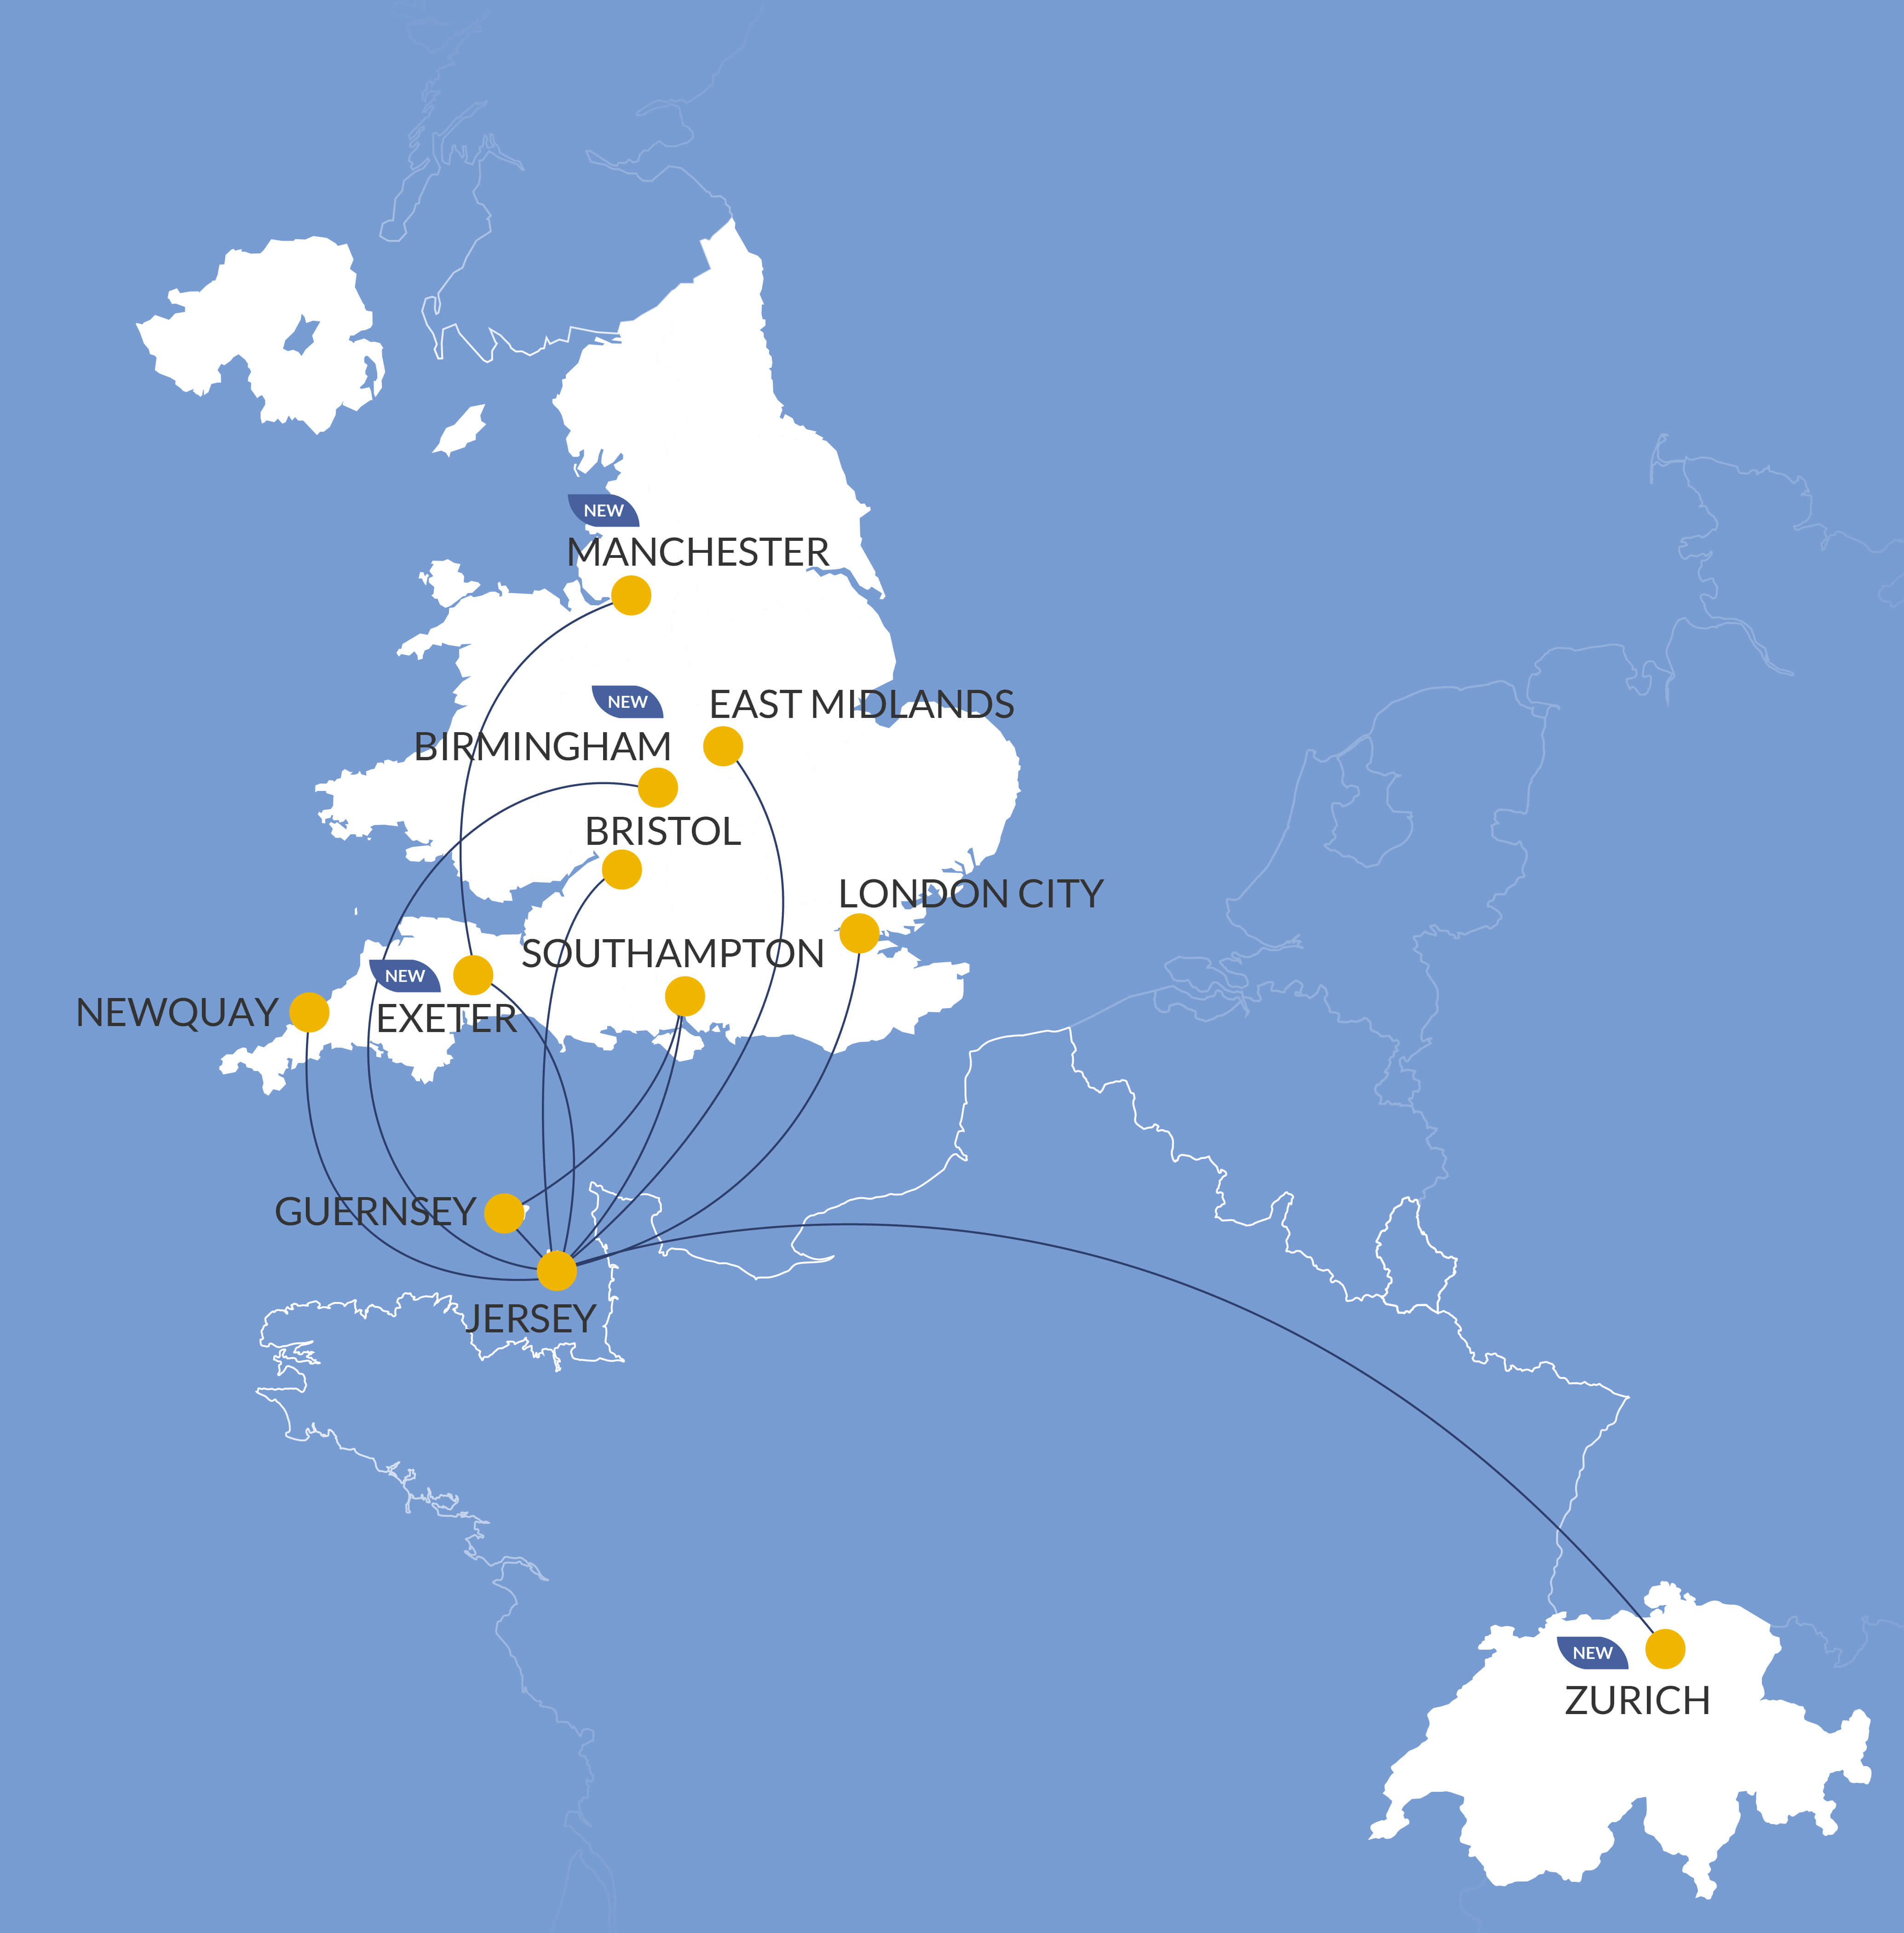 flights from jersey to london city